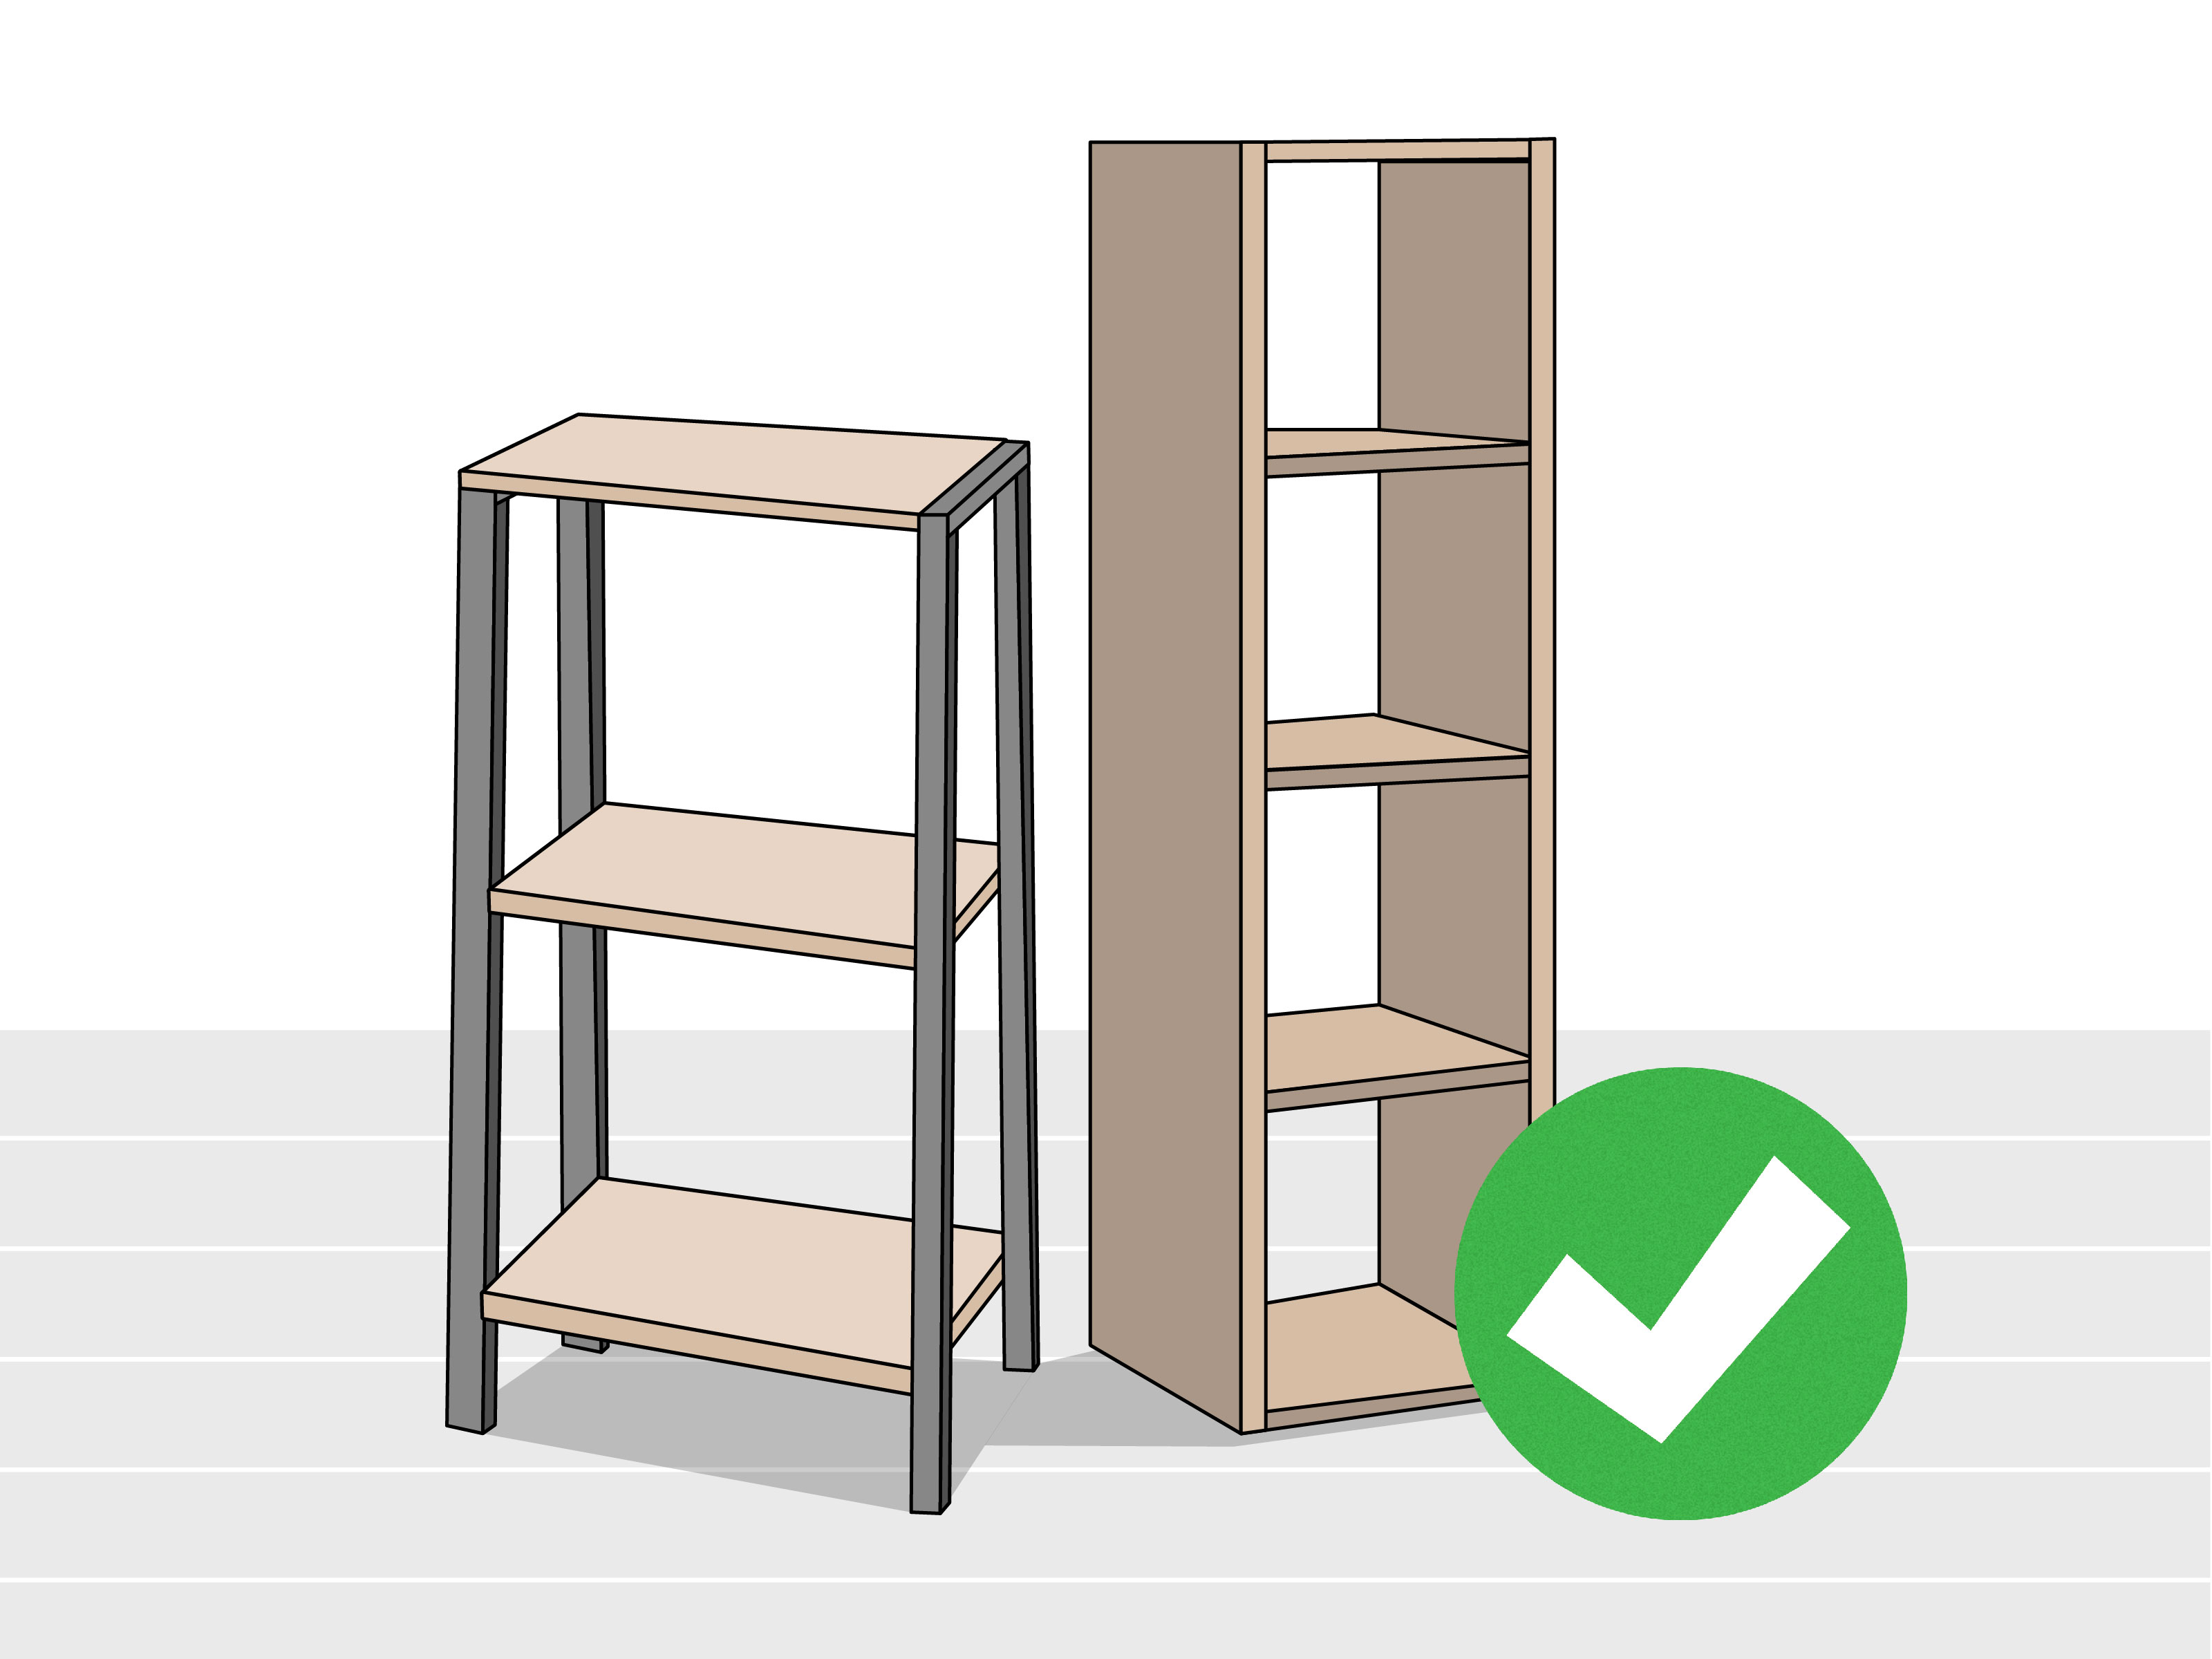 how hang shelves without nails steps with tures step floating using command strips corner shelf board weathered wall bookshelf simple design kmart bedside table narrow kitchen